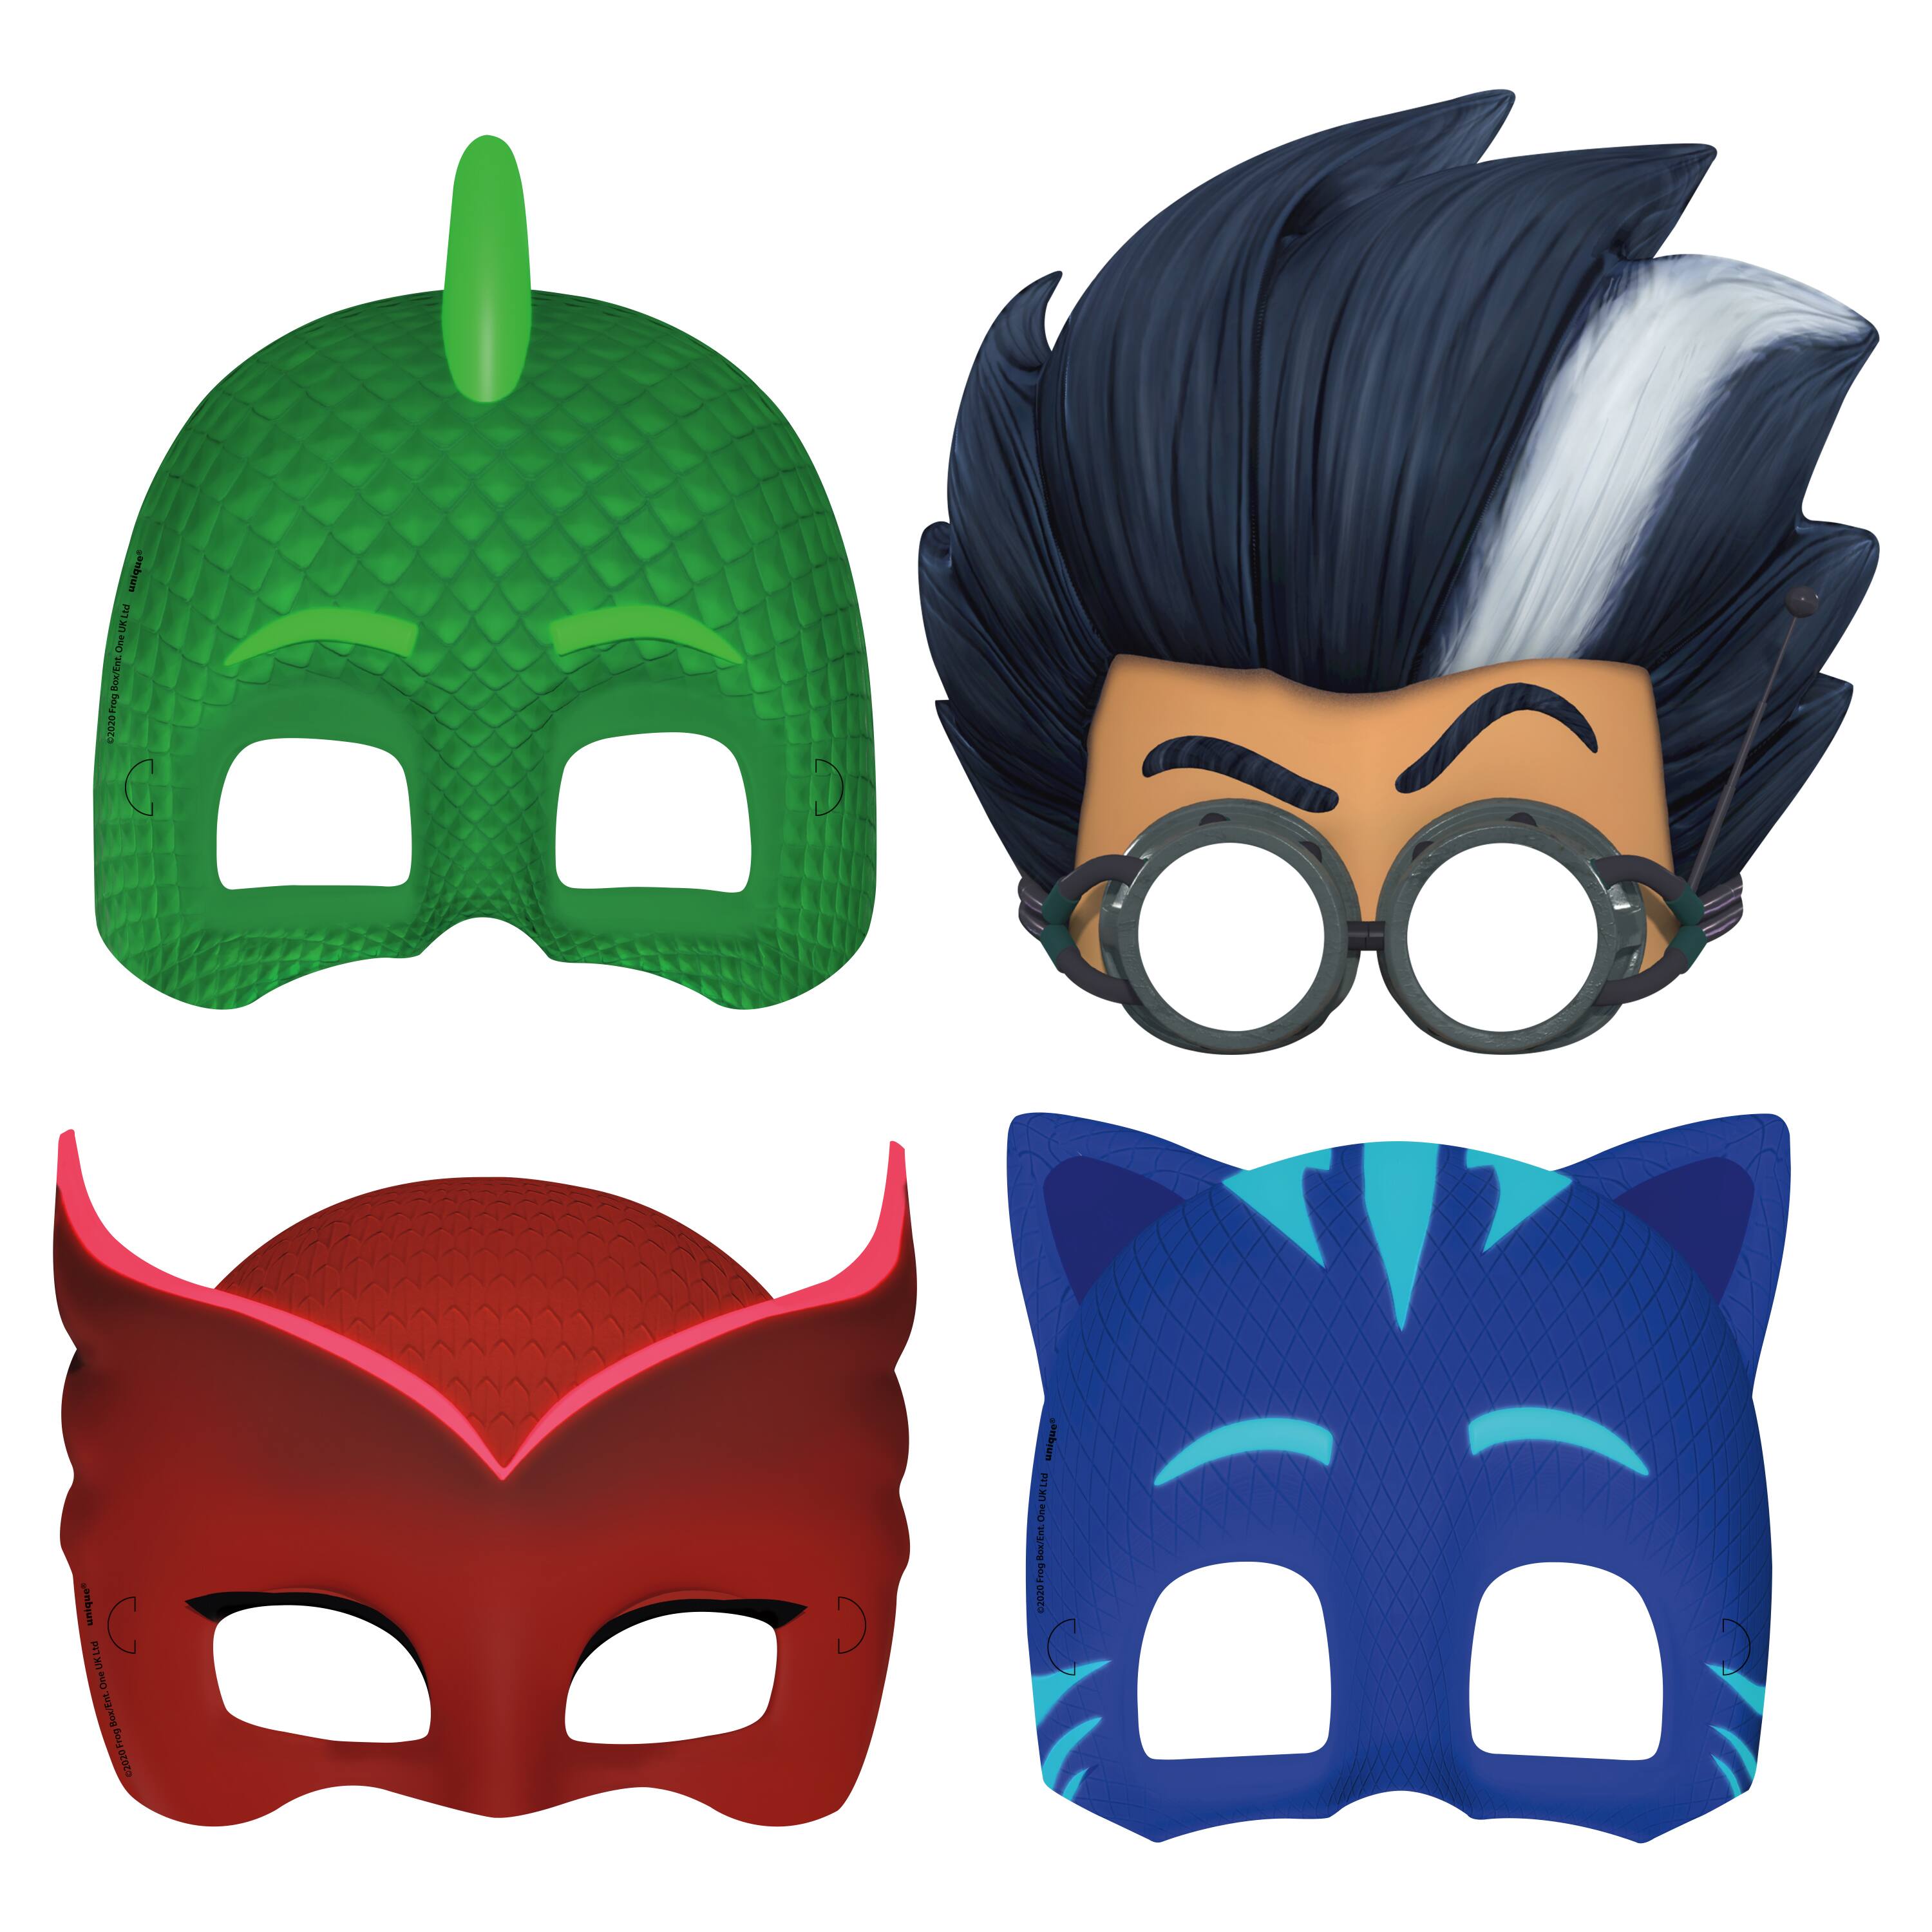 10 PJ Masks Party Favor Box Loot Bags Kids Birthday Party Supplies Treat Bags 